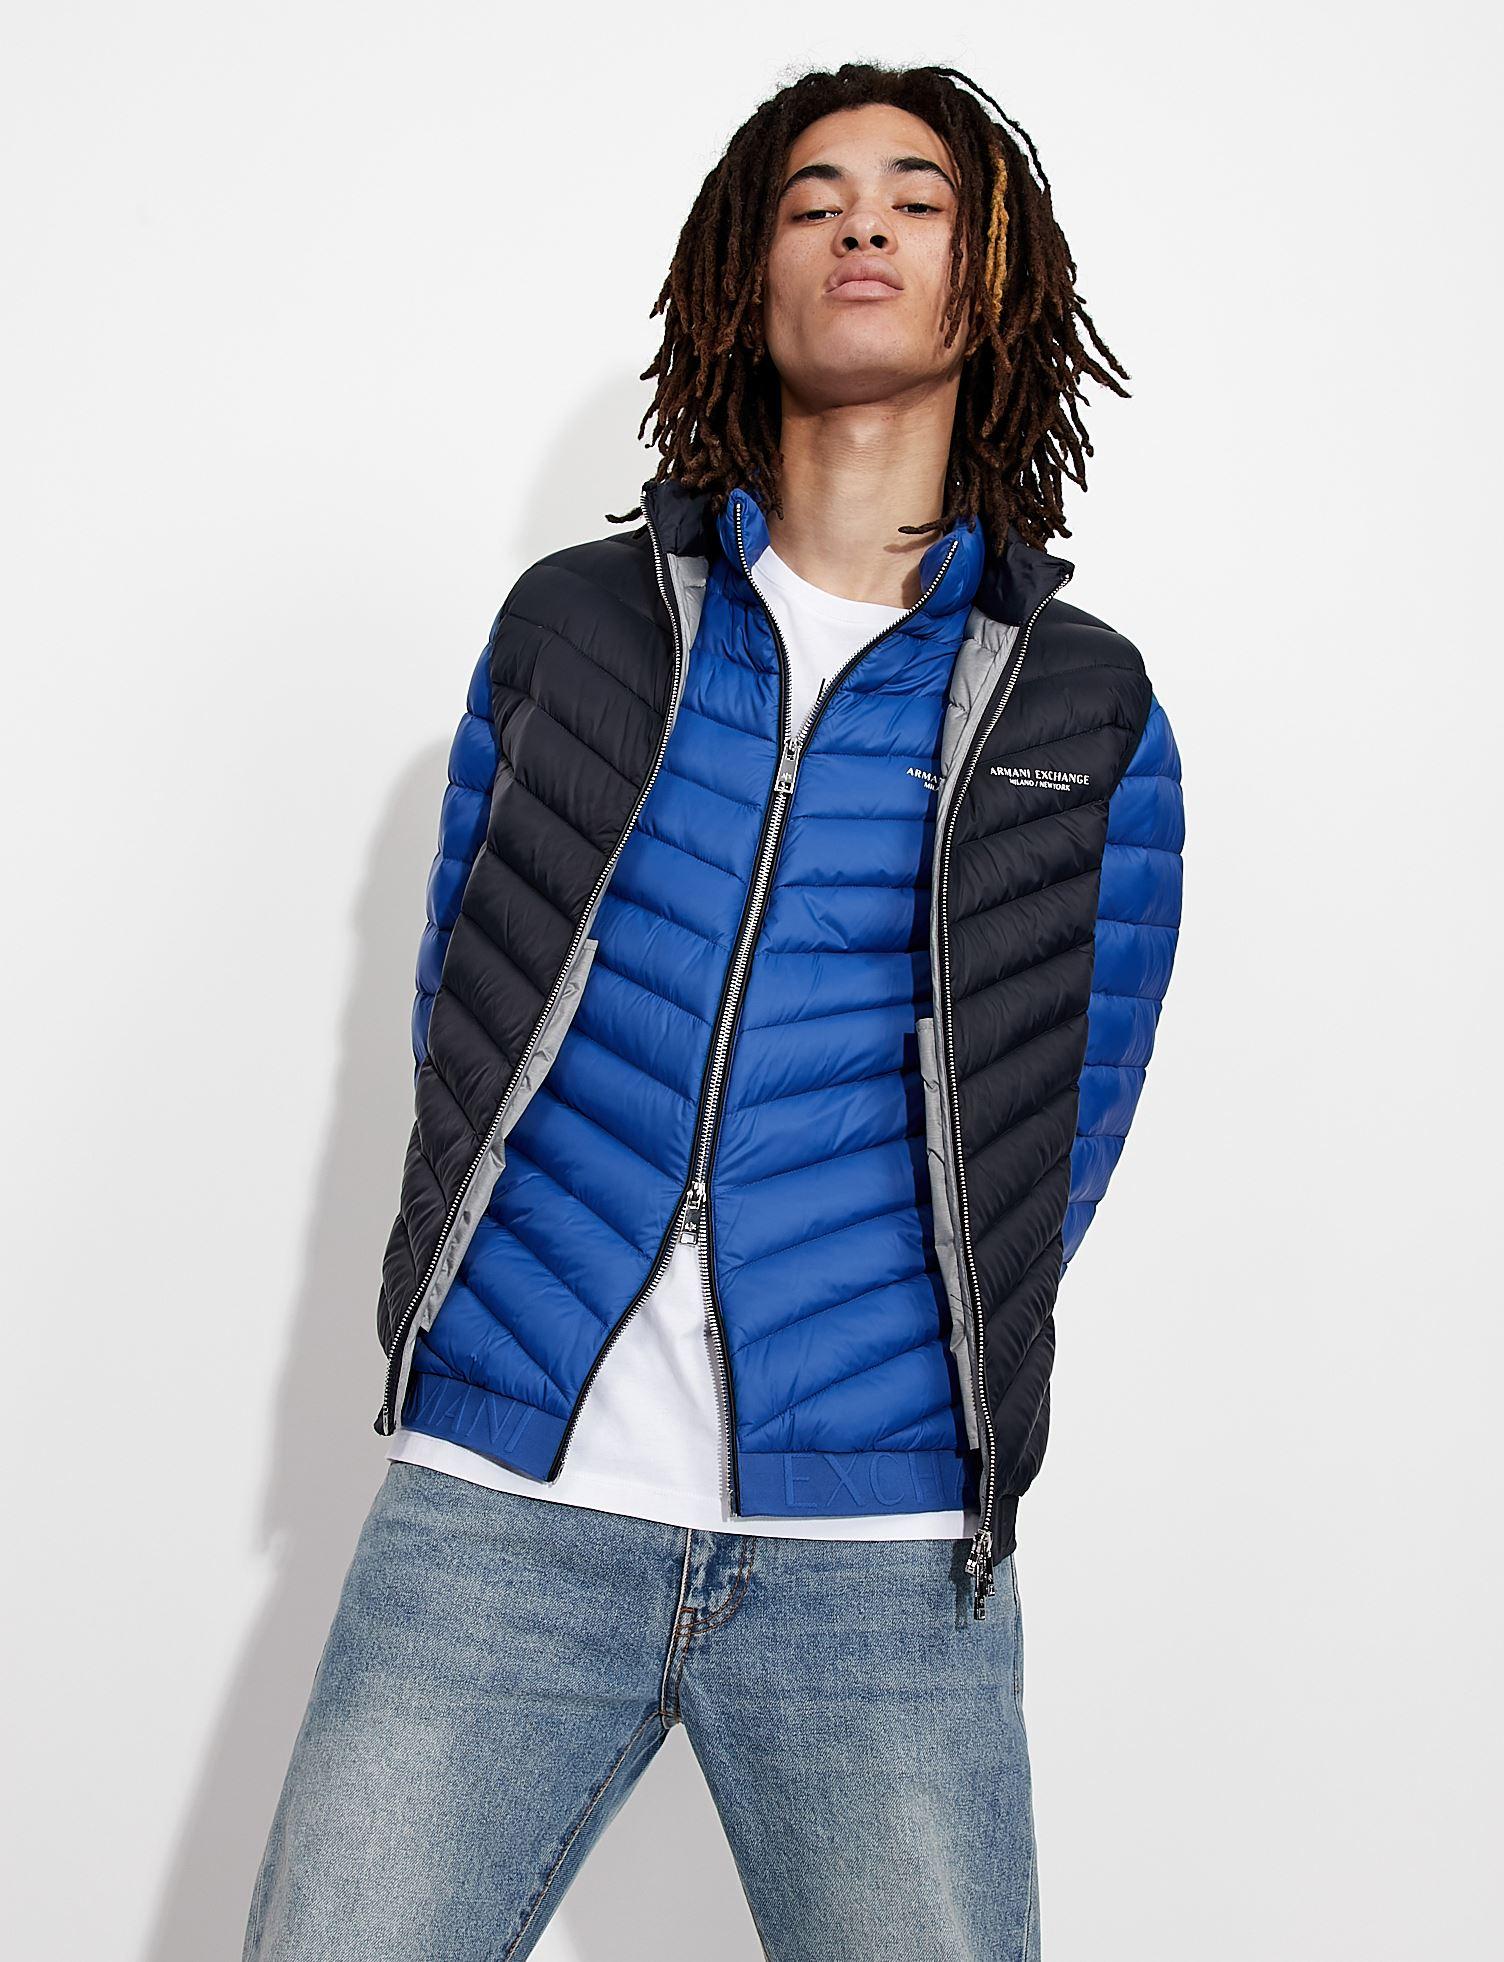 Armani Exchange Milano New York Puffer Jacket in Blue for Men | Lyst